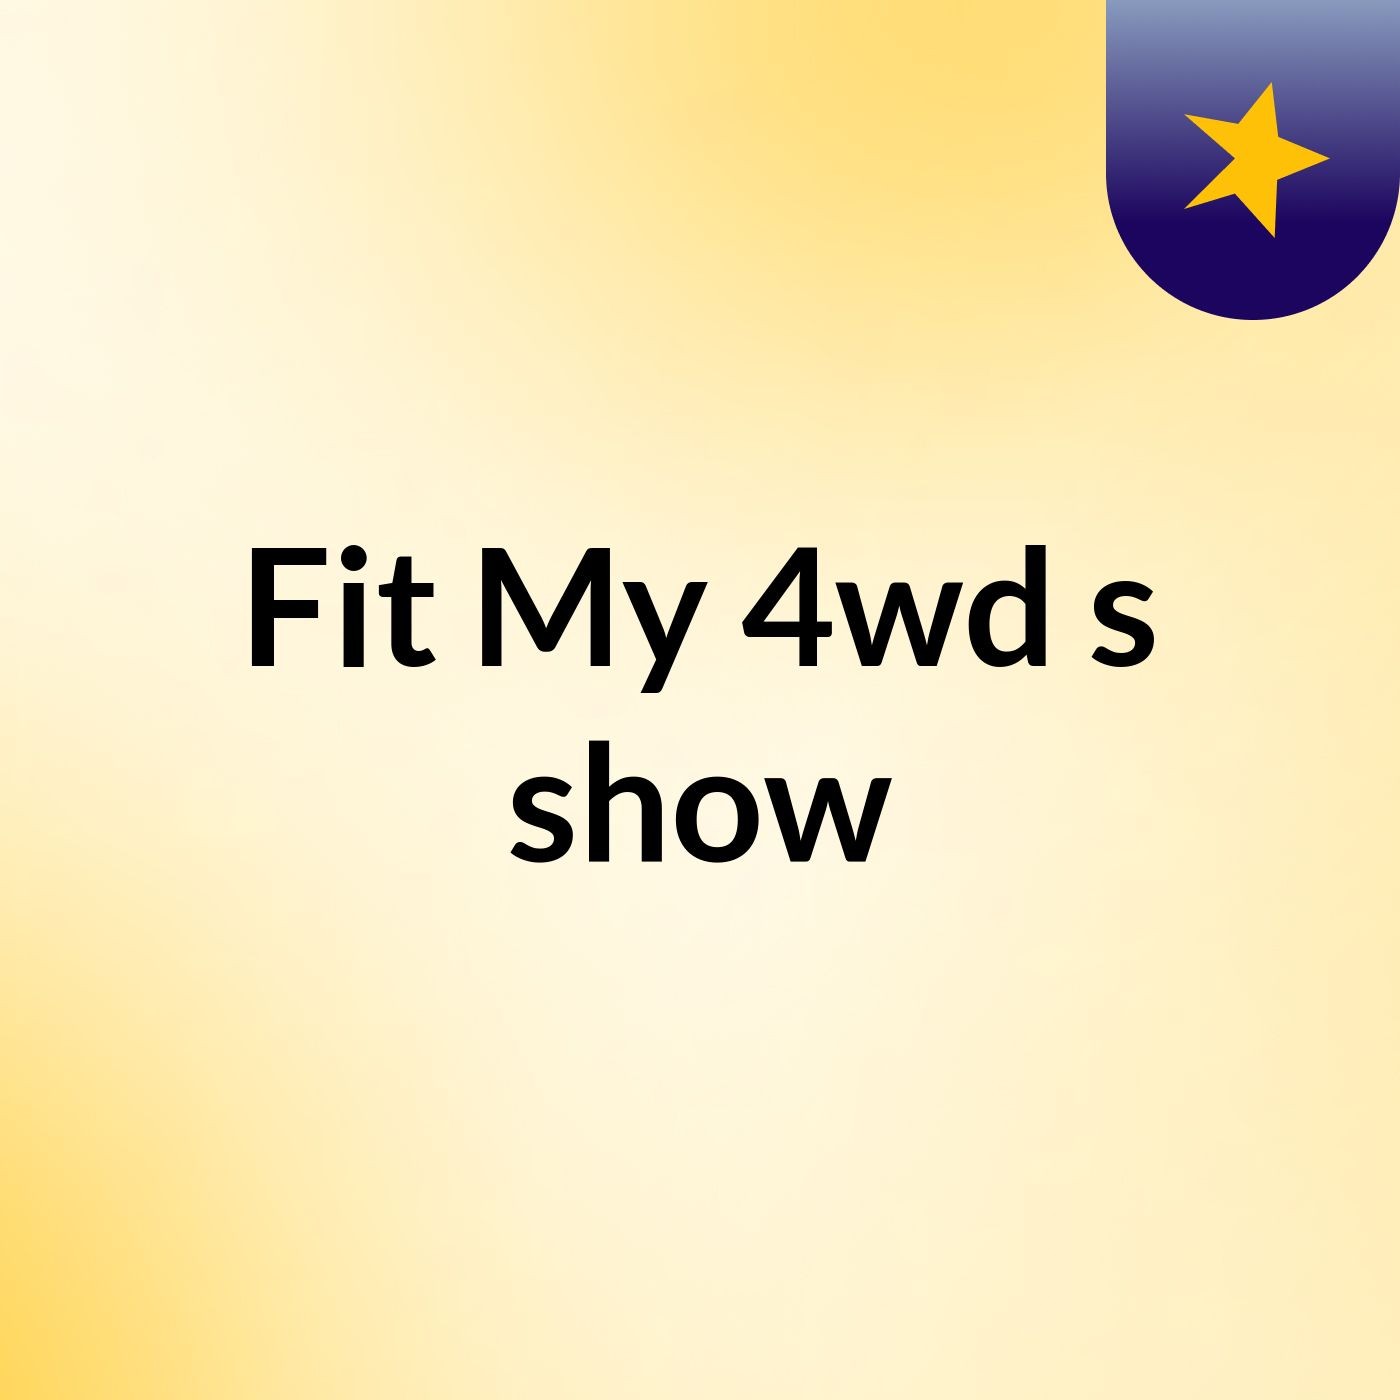 Fit My 4wd's show